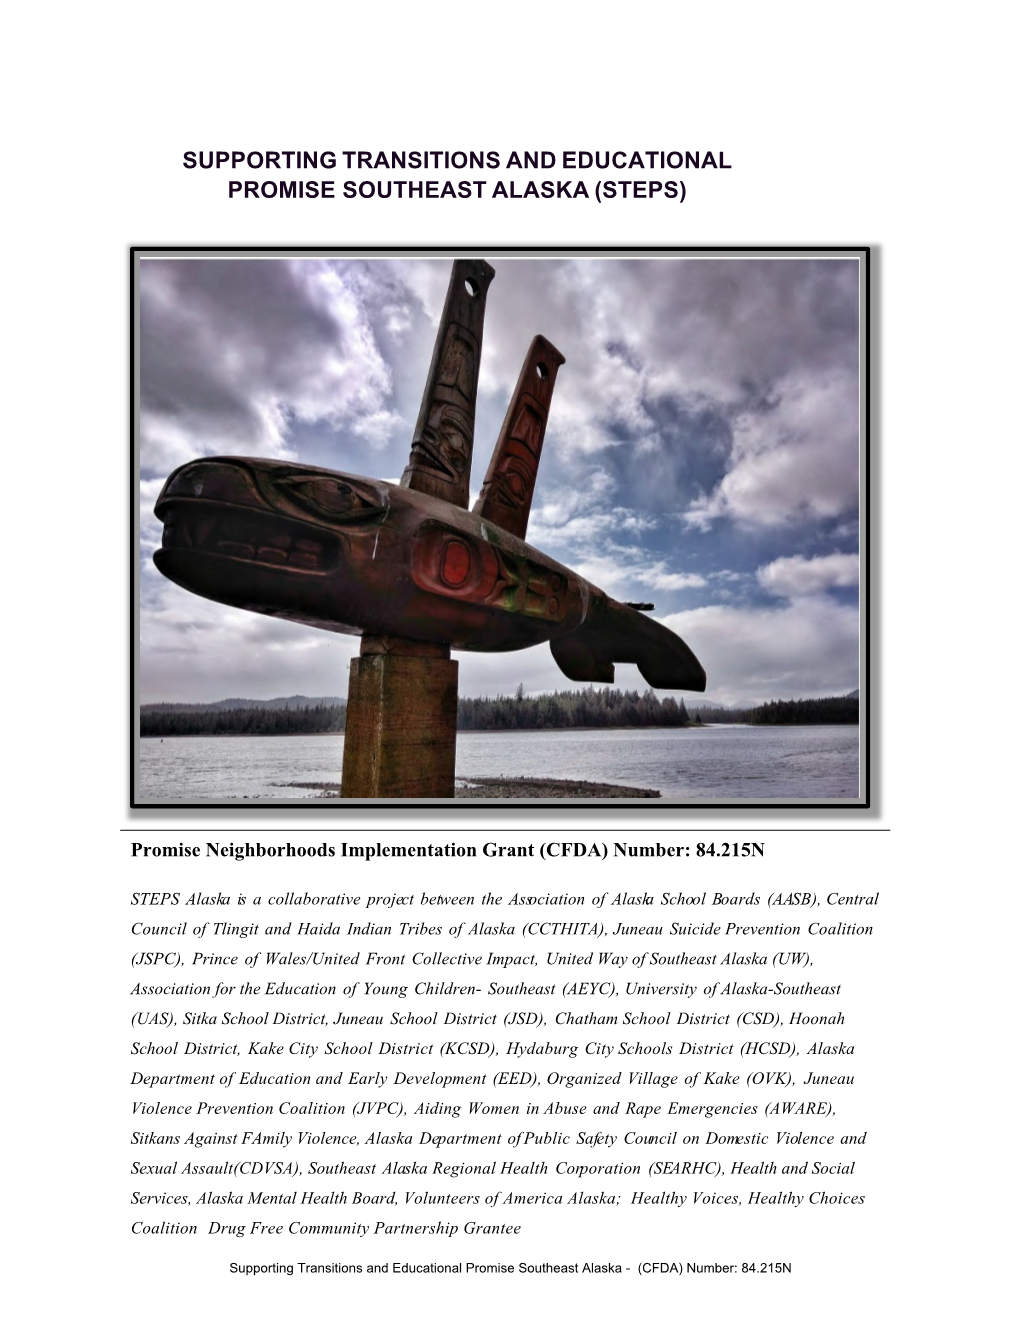 Supporting Transitions and Educational Promise Southeast Alaska (Steps)